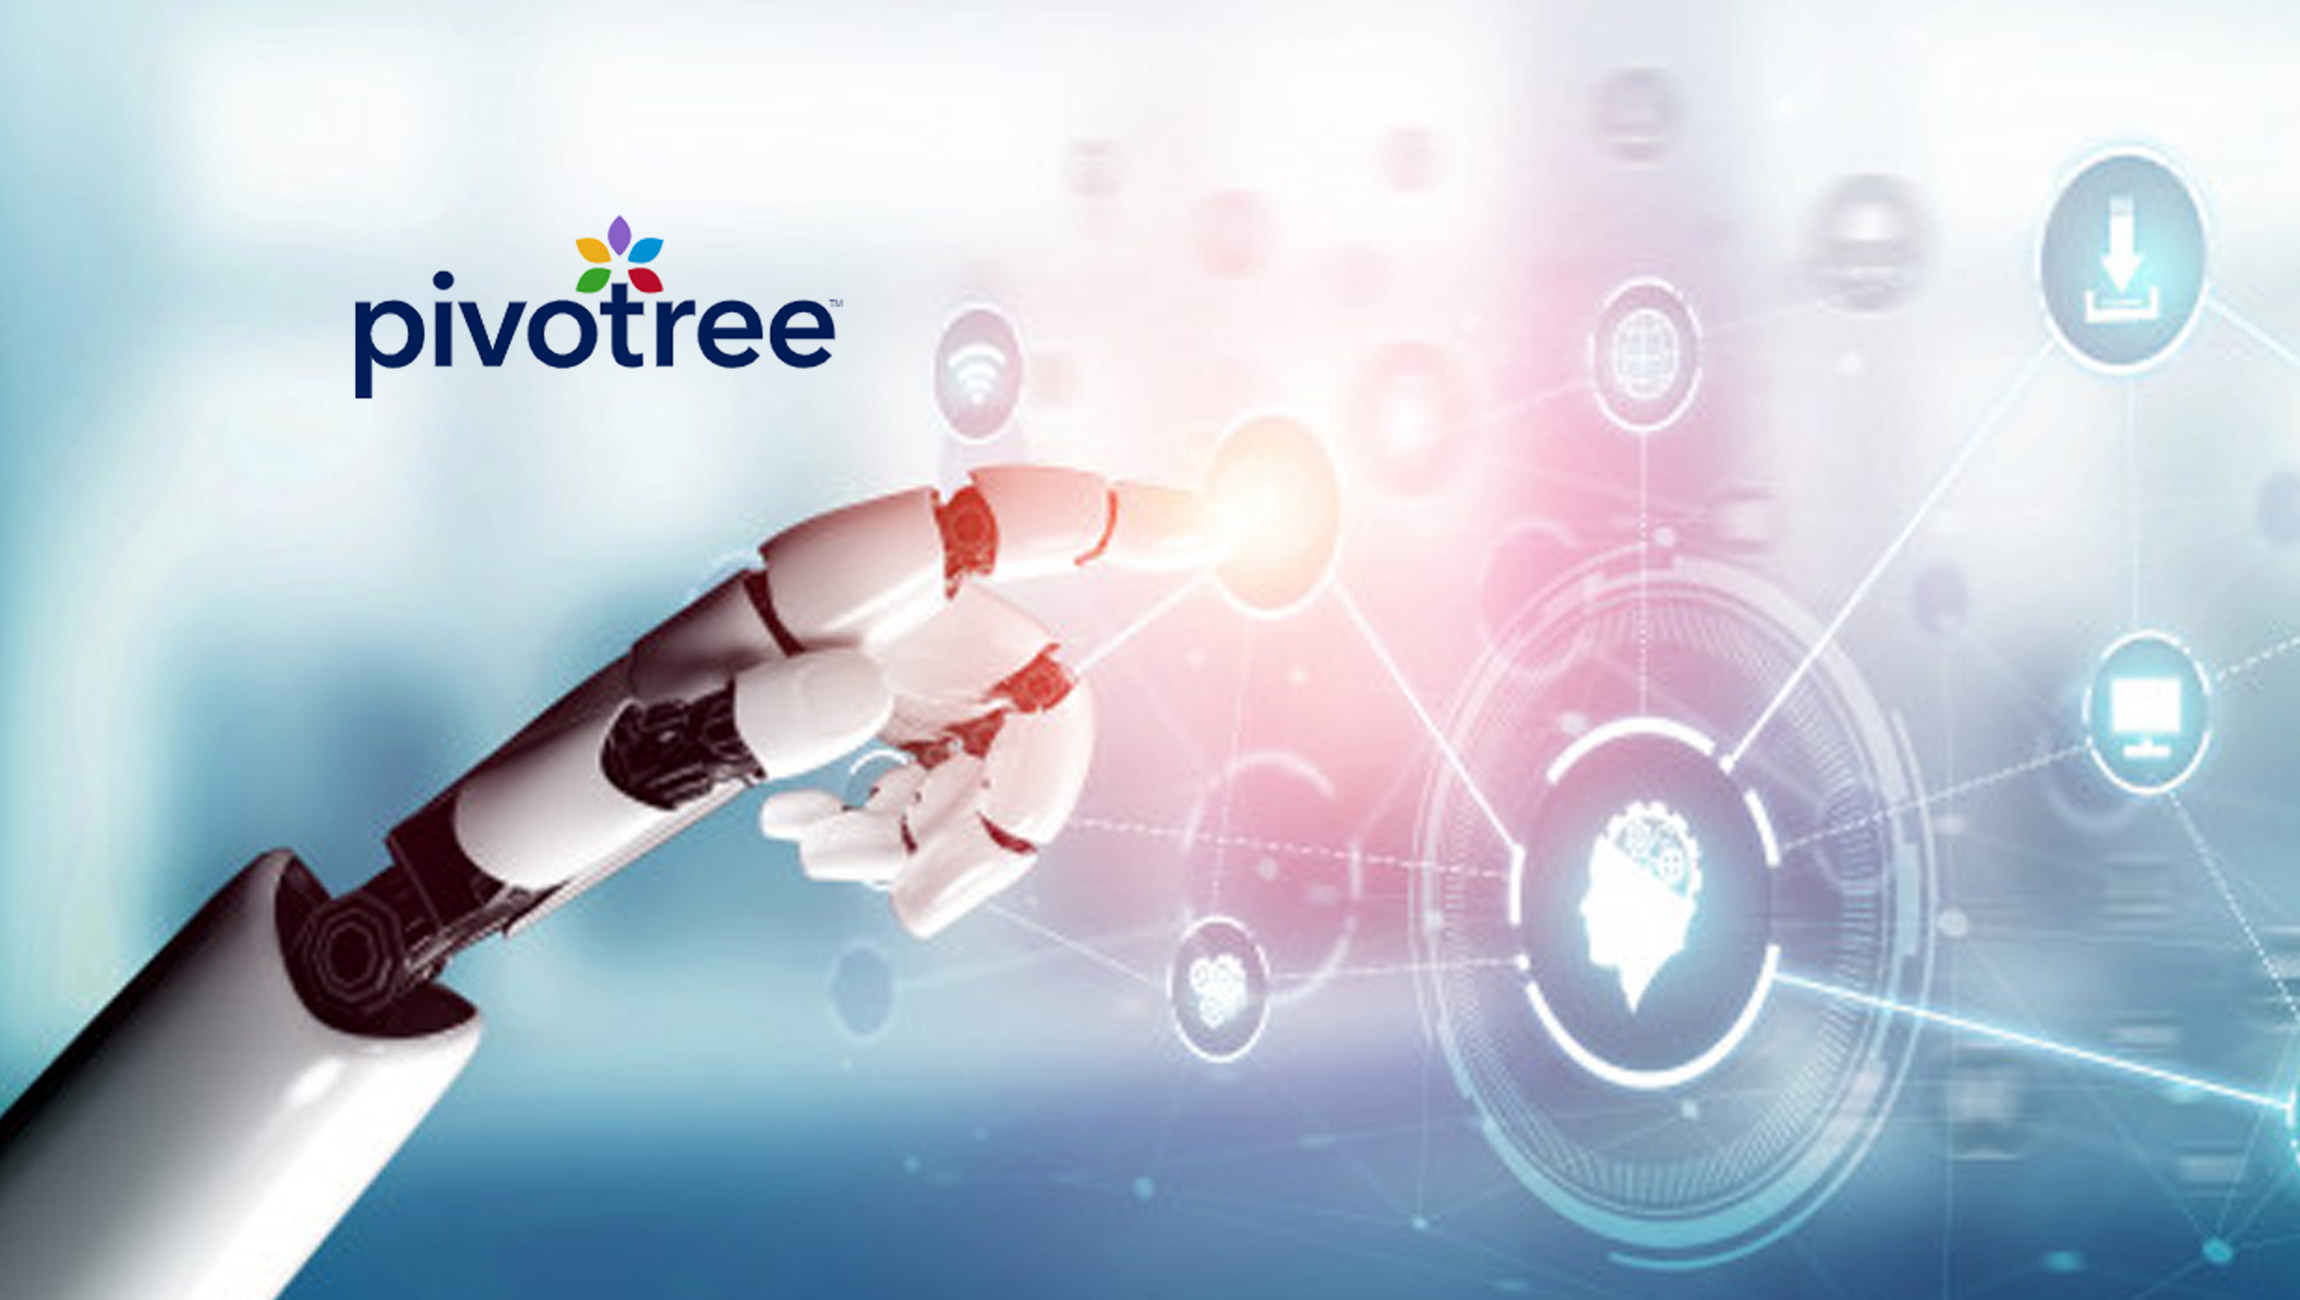 Pivotree Updates Machine Learning Platform With Image Recognition Features and Enhanced Data Management Functionality